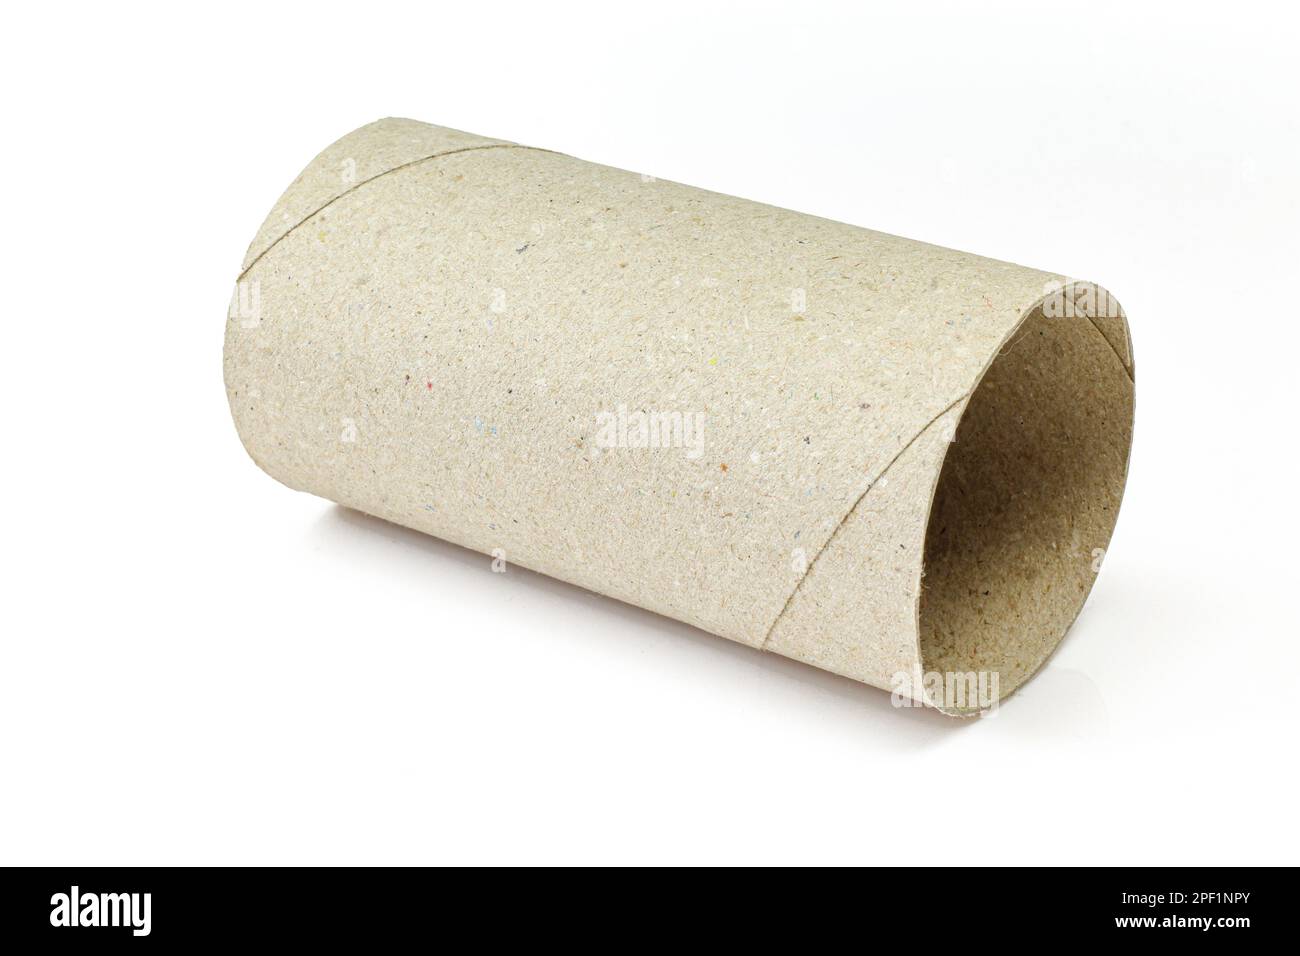 Empty carboard cylinder shaped toilet paper core isolated on white background Stock Photo